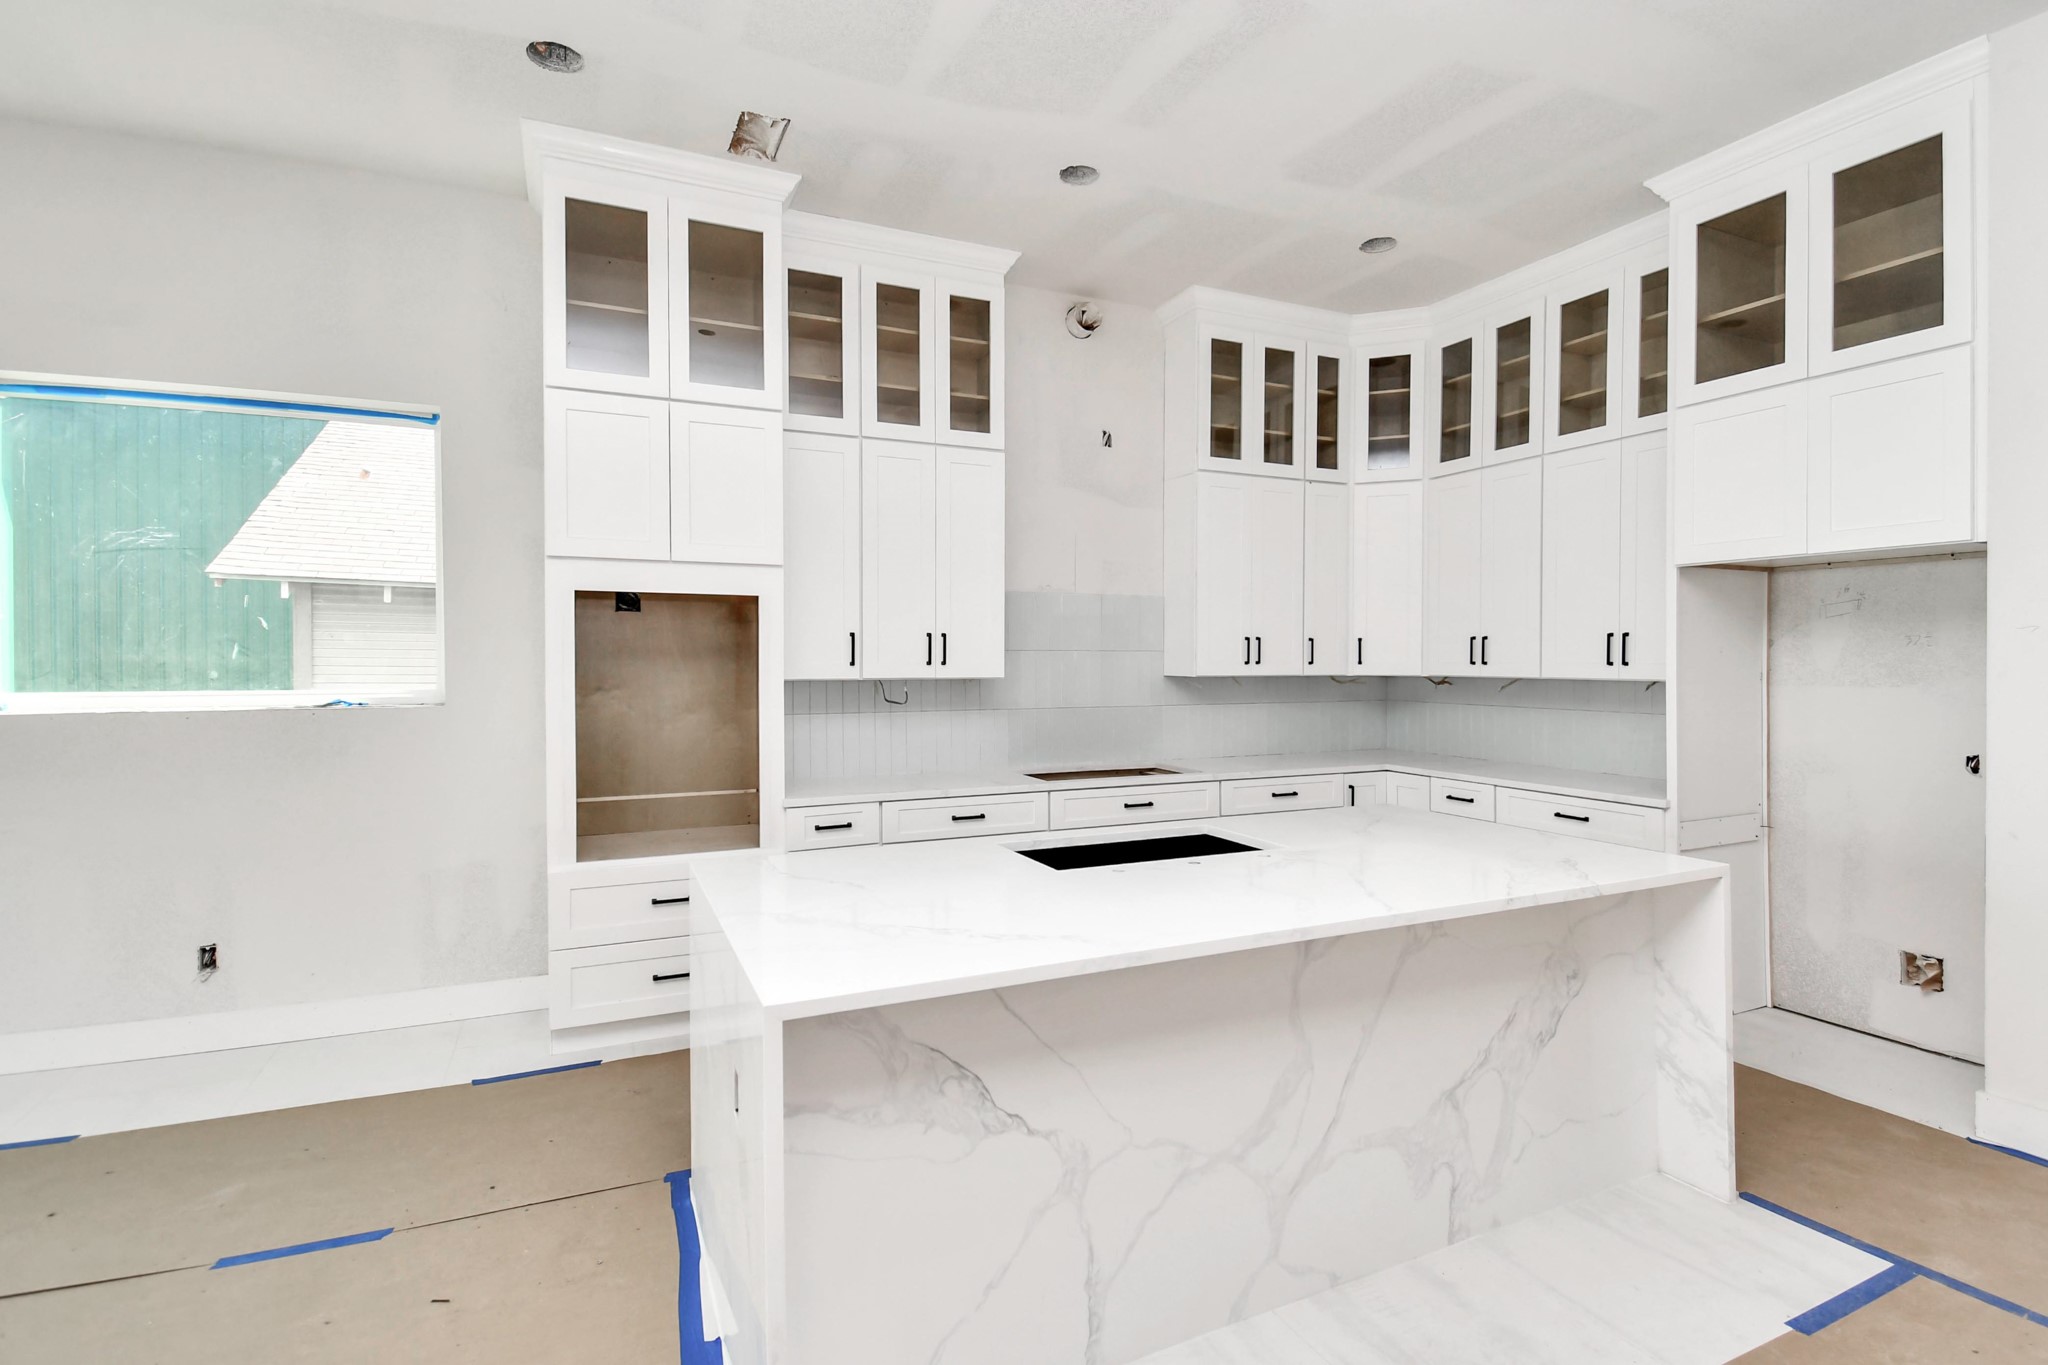 The custom cabinetry and waterfall island are one of the many luxe details this home possesses.